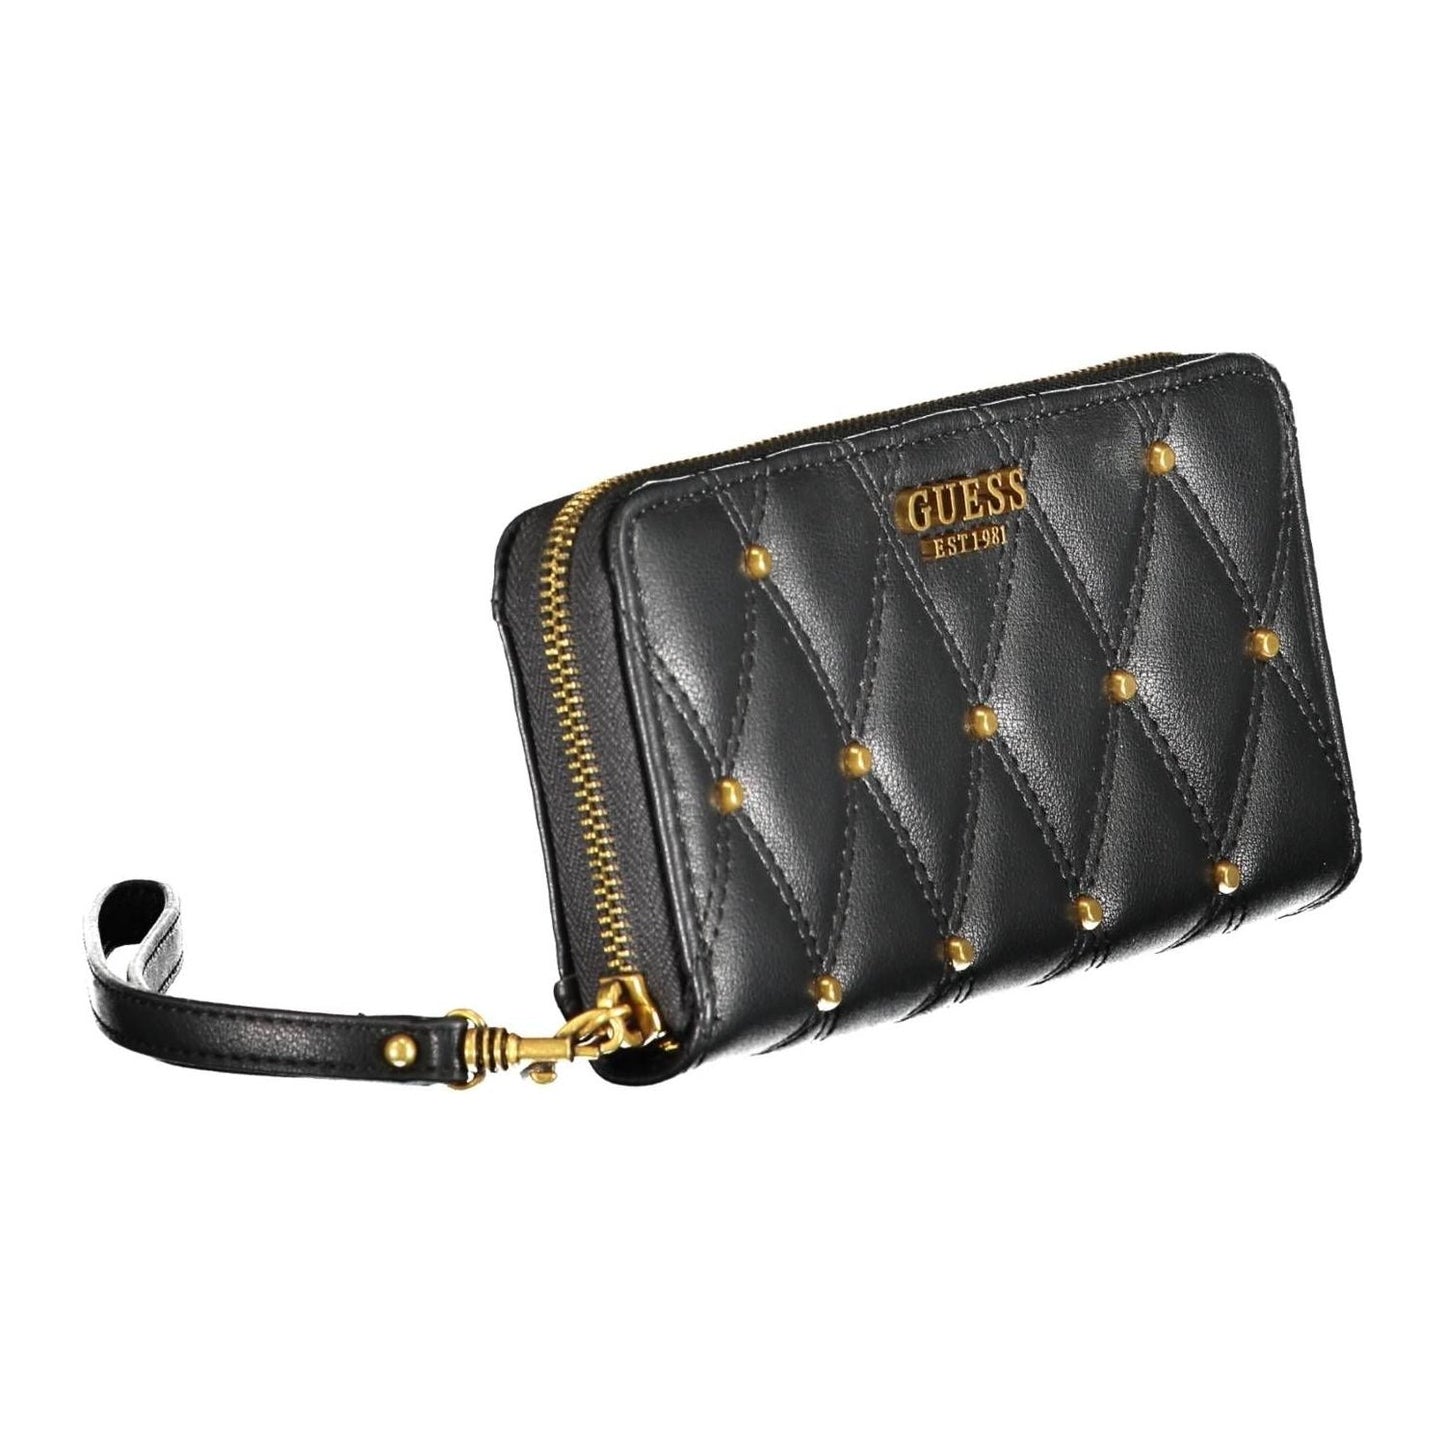 Guess Jeans Chic Contrasting Details Zip Wallet chic-contrasting-details-zip-wallet